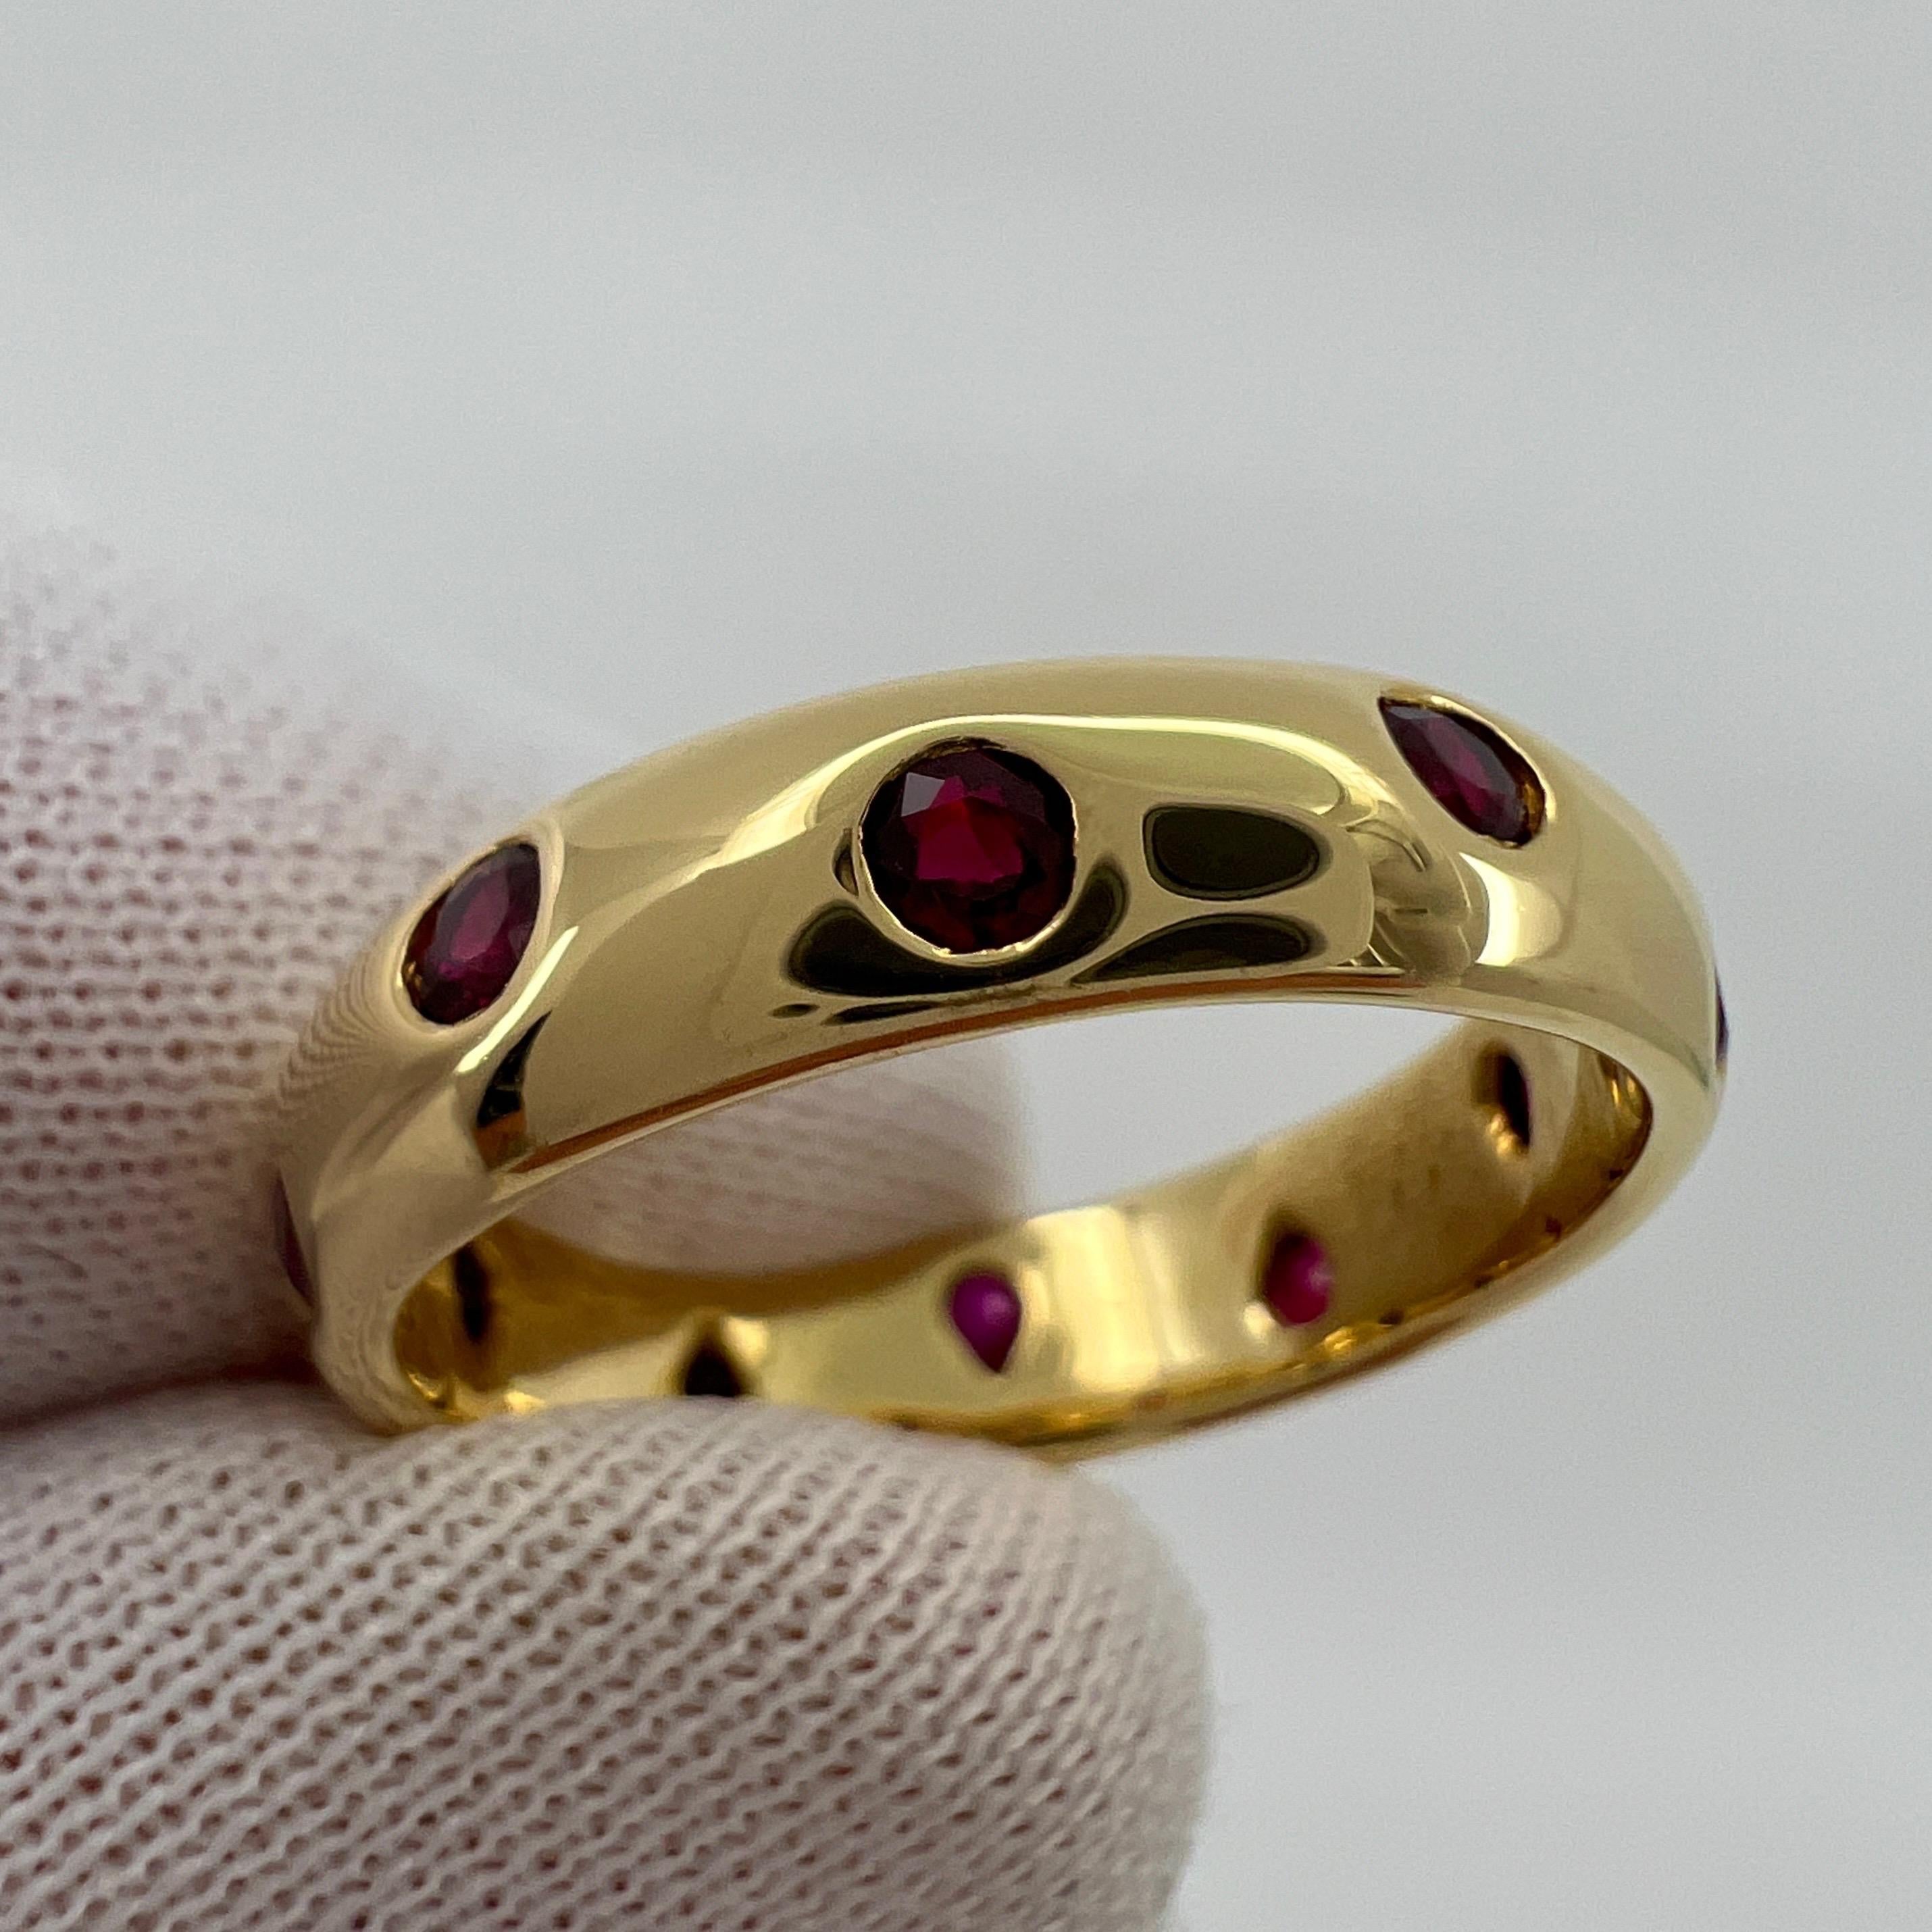 Vintage Rare Tiffany & Co. Fine Red Ruby 18k Yellow Gold Etoile Band Ring 2